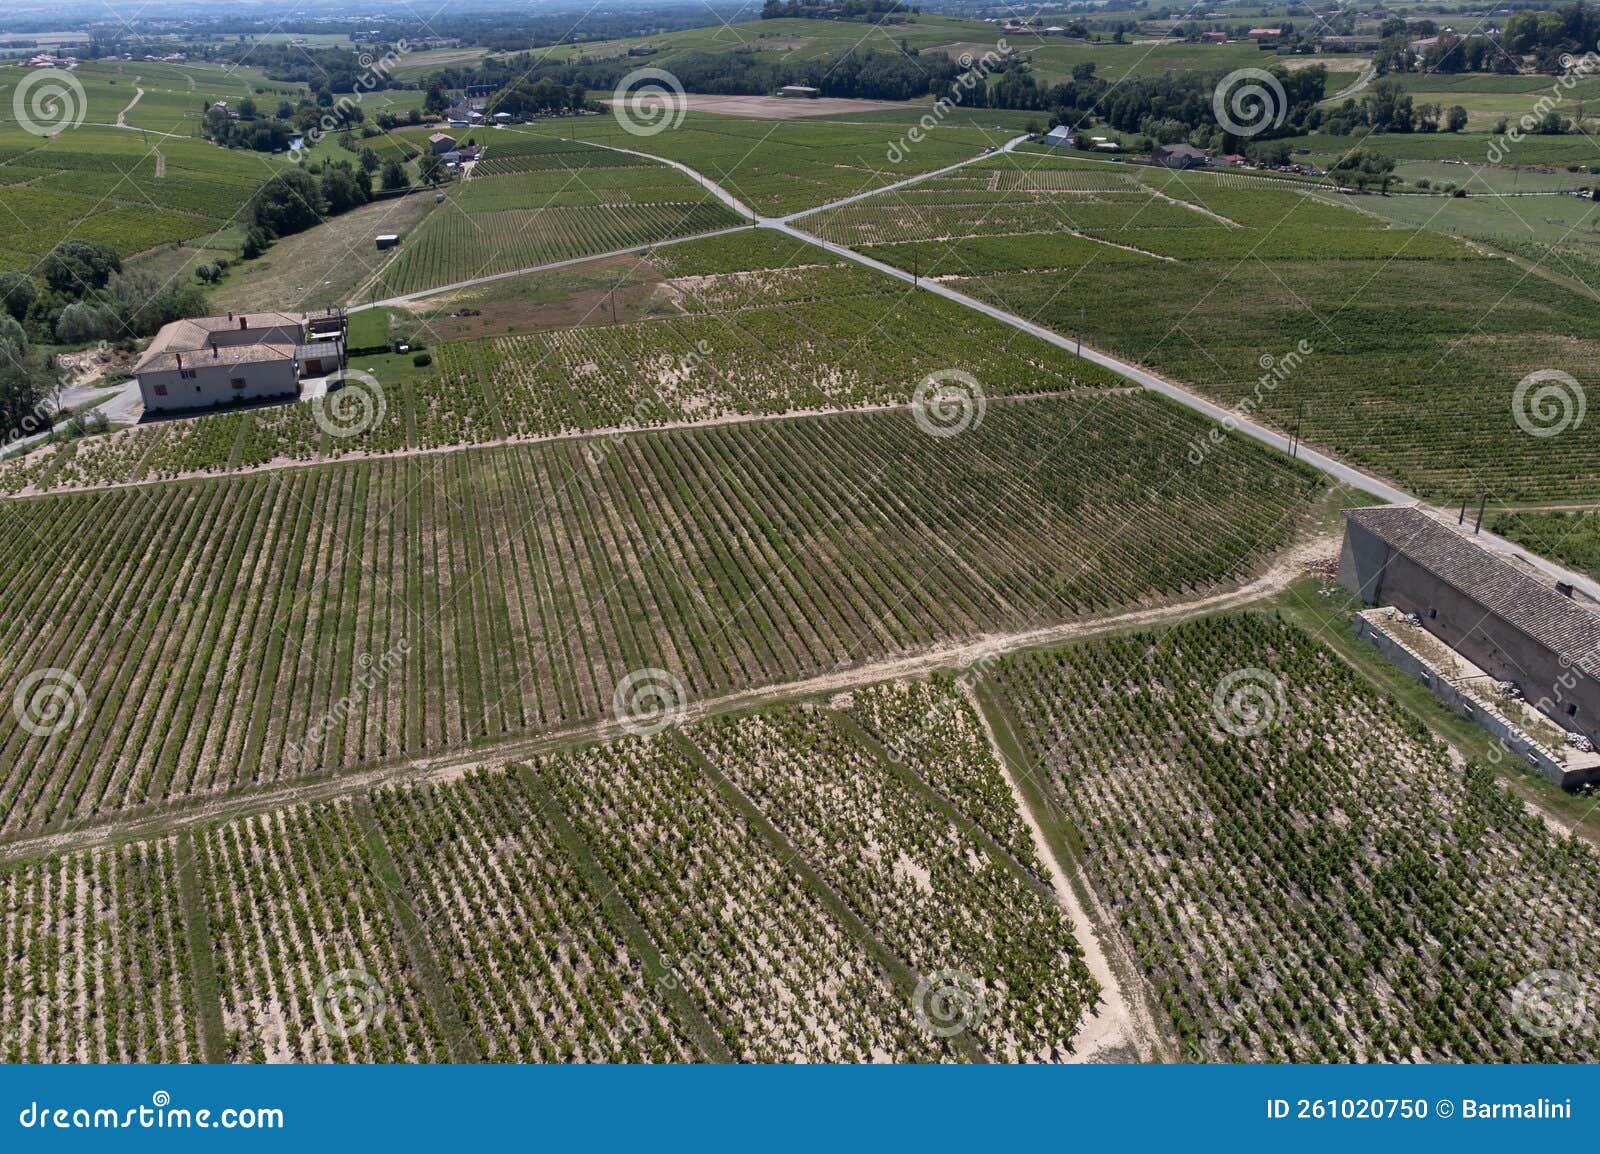 aerial view on vineyards and villages near mont brouilly, wine appellation cÃÂ´te de brouilly beaujolais wine making area along